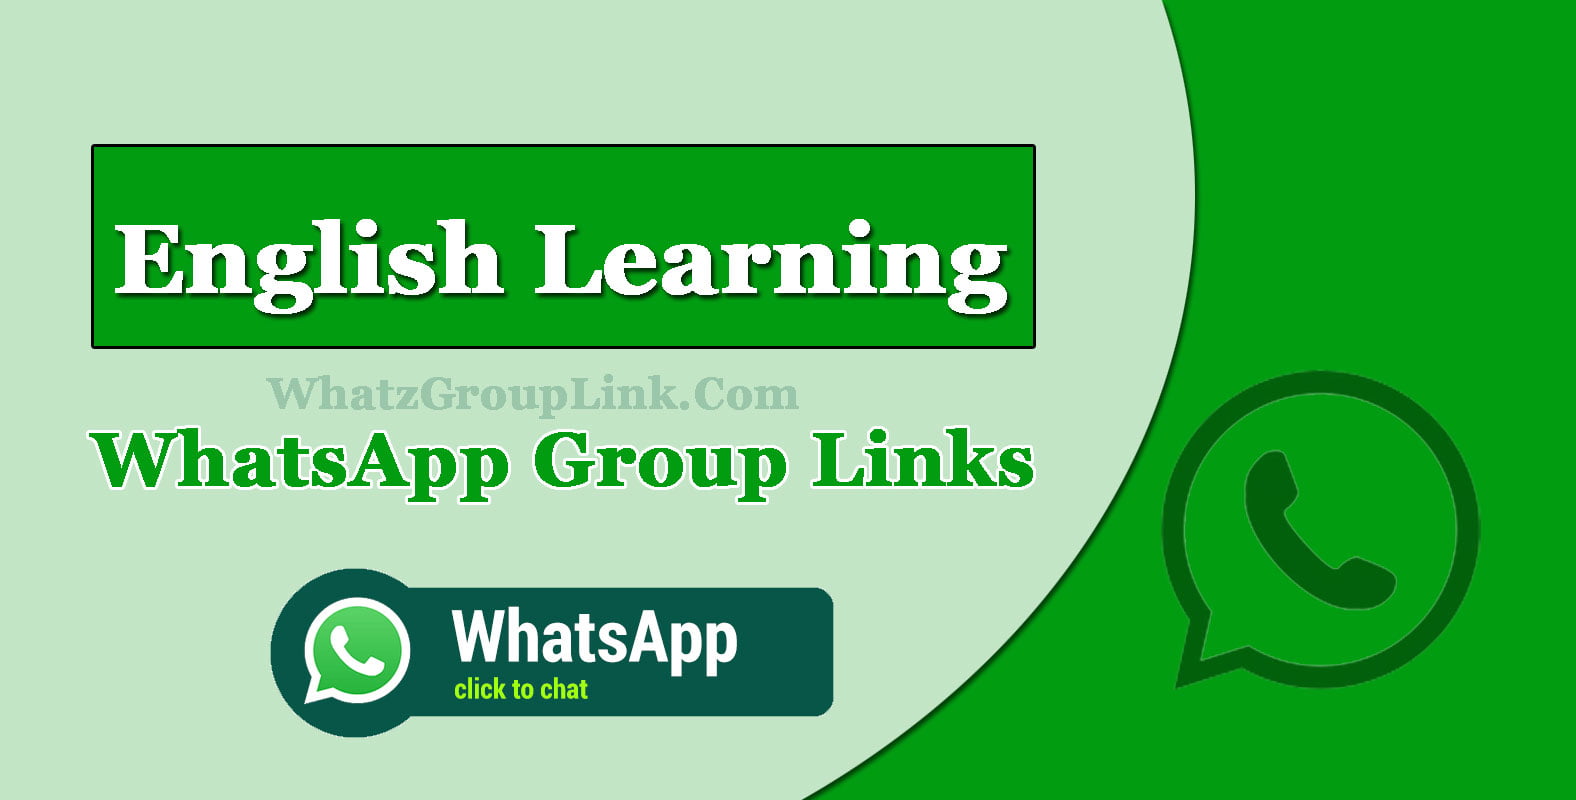 English Learning WhatsApp Group Link